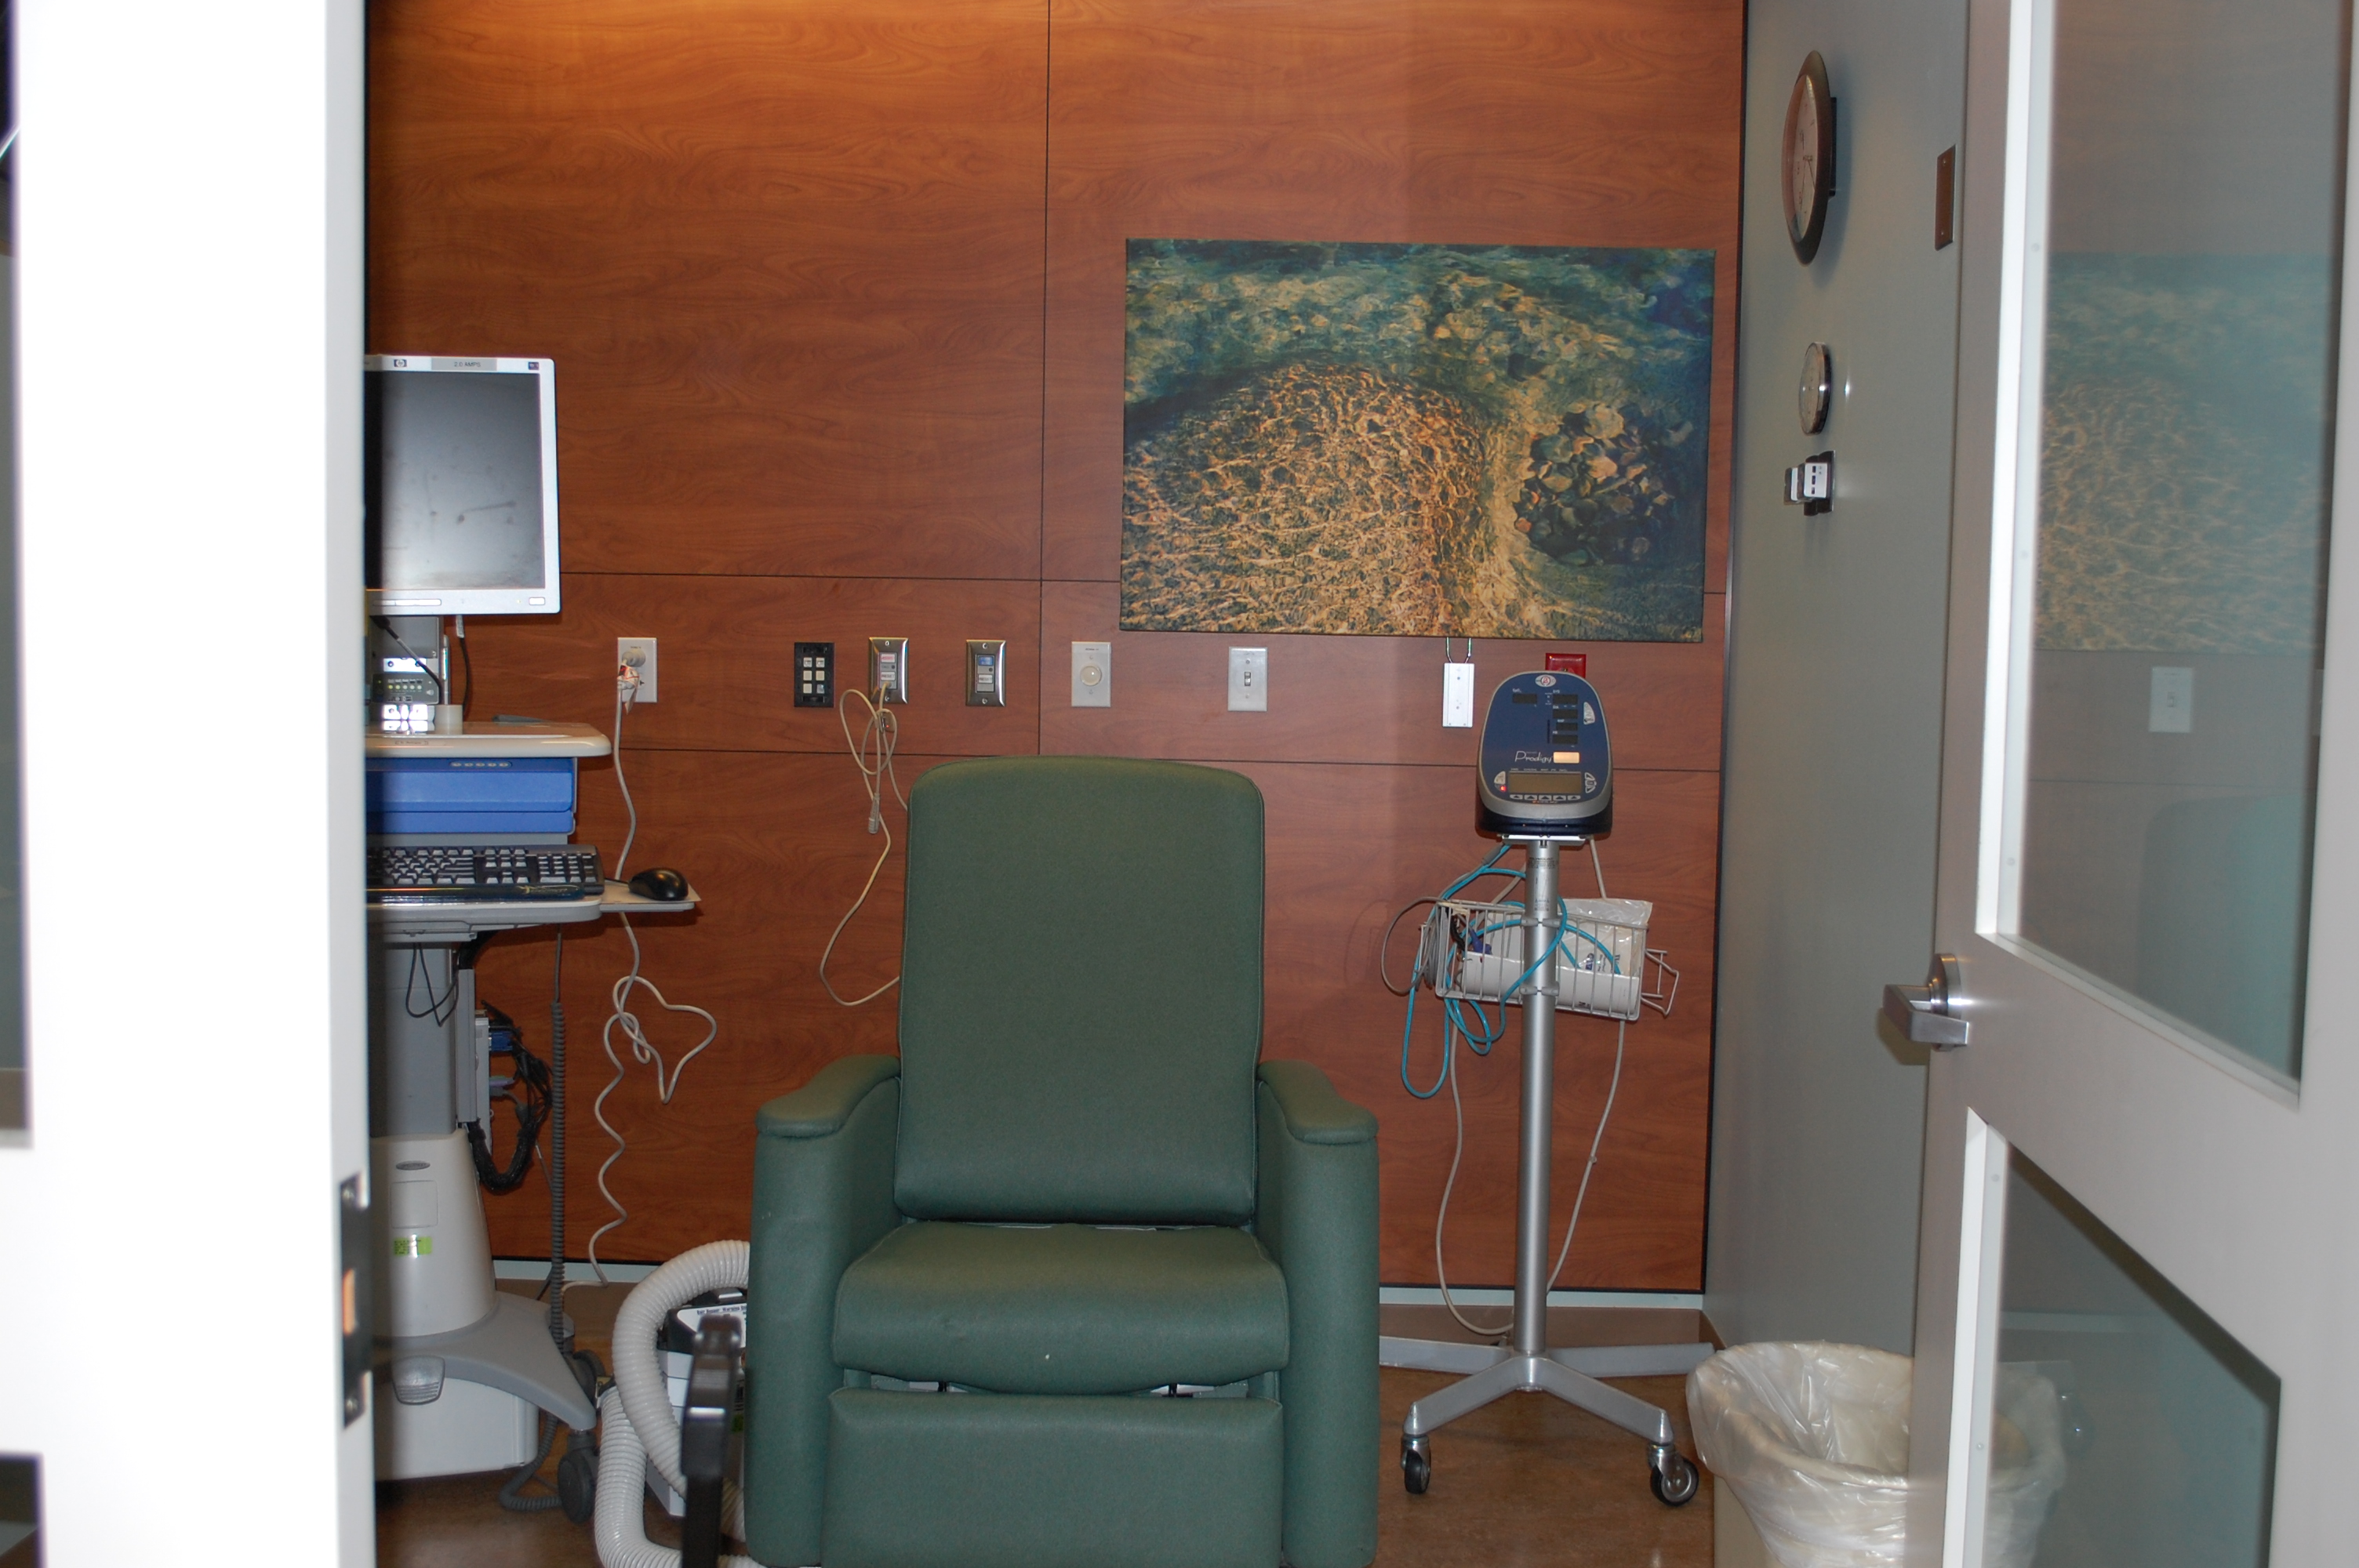 Paneling, Art, Furniture for Surgery Center